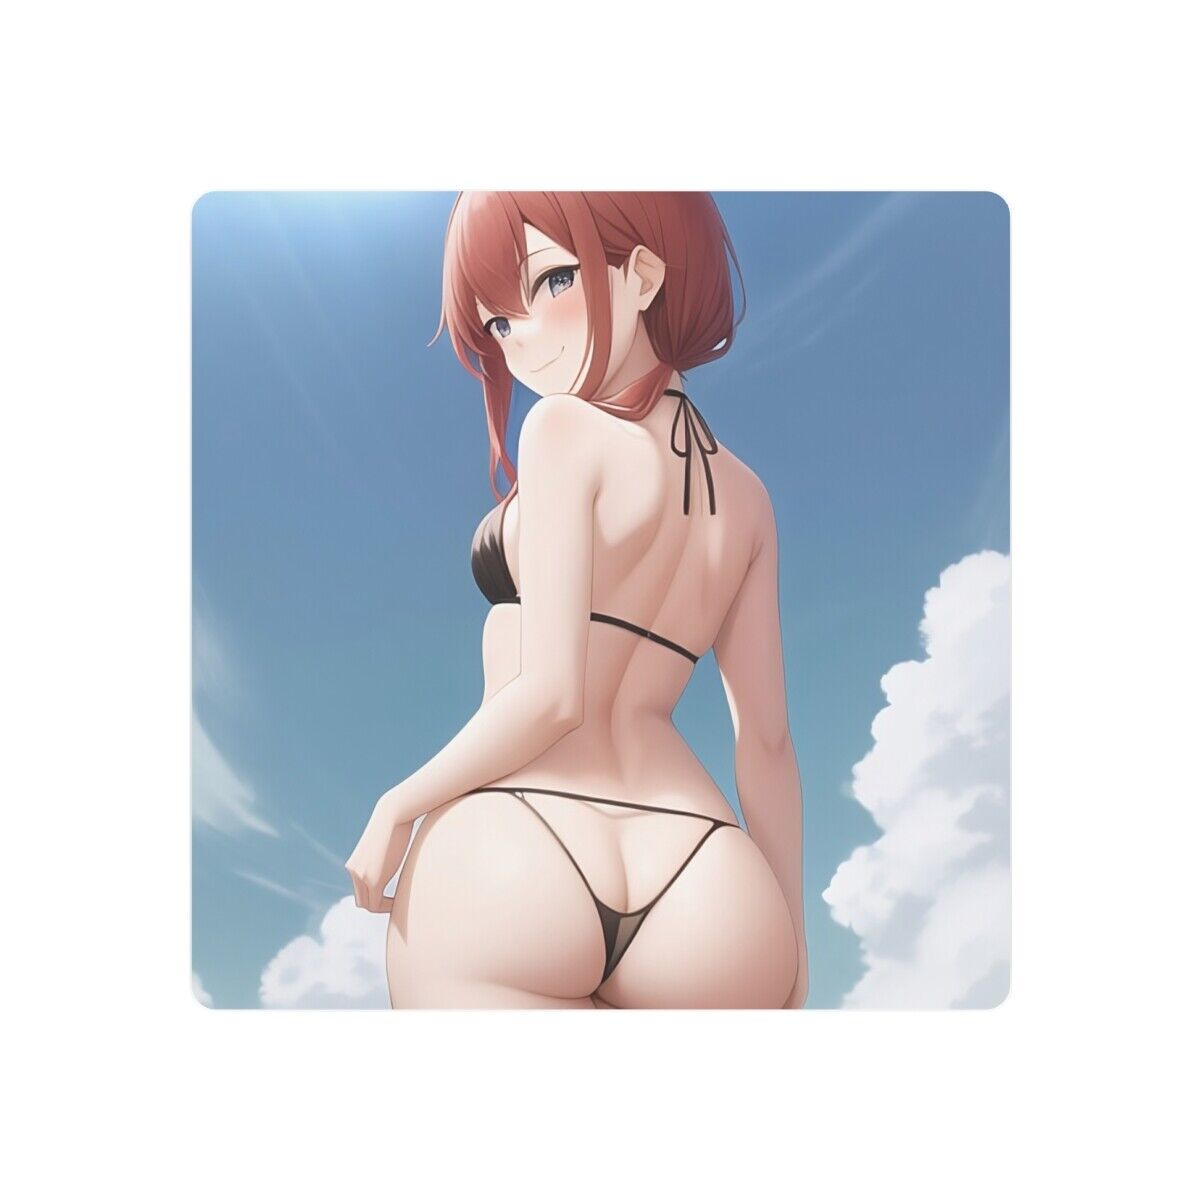 devin delgado recommends Anime Girl In Thong